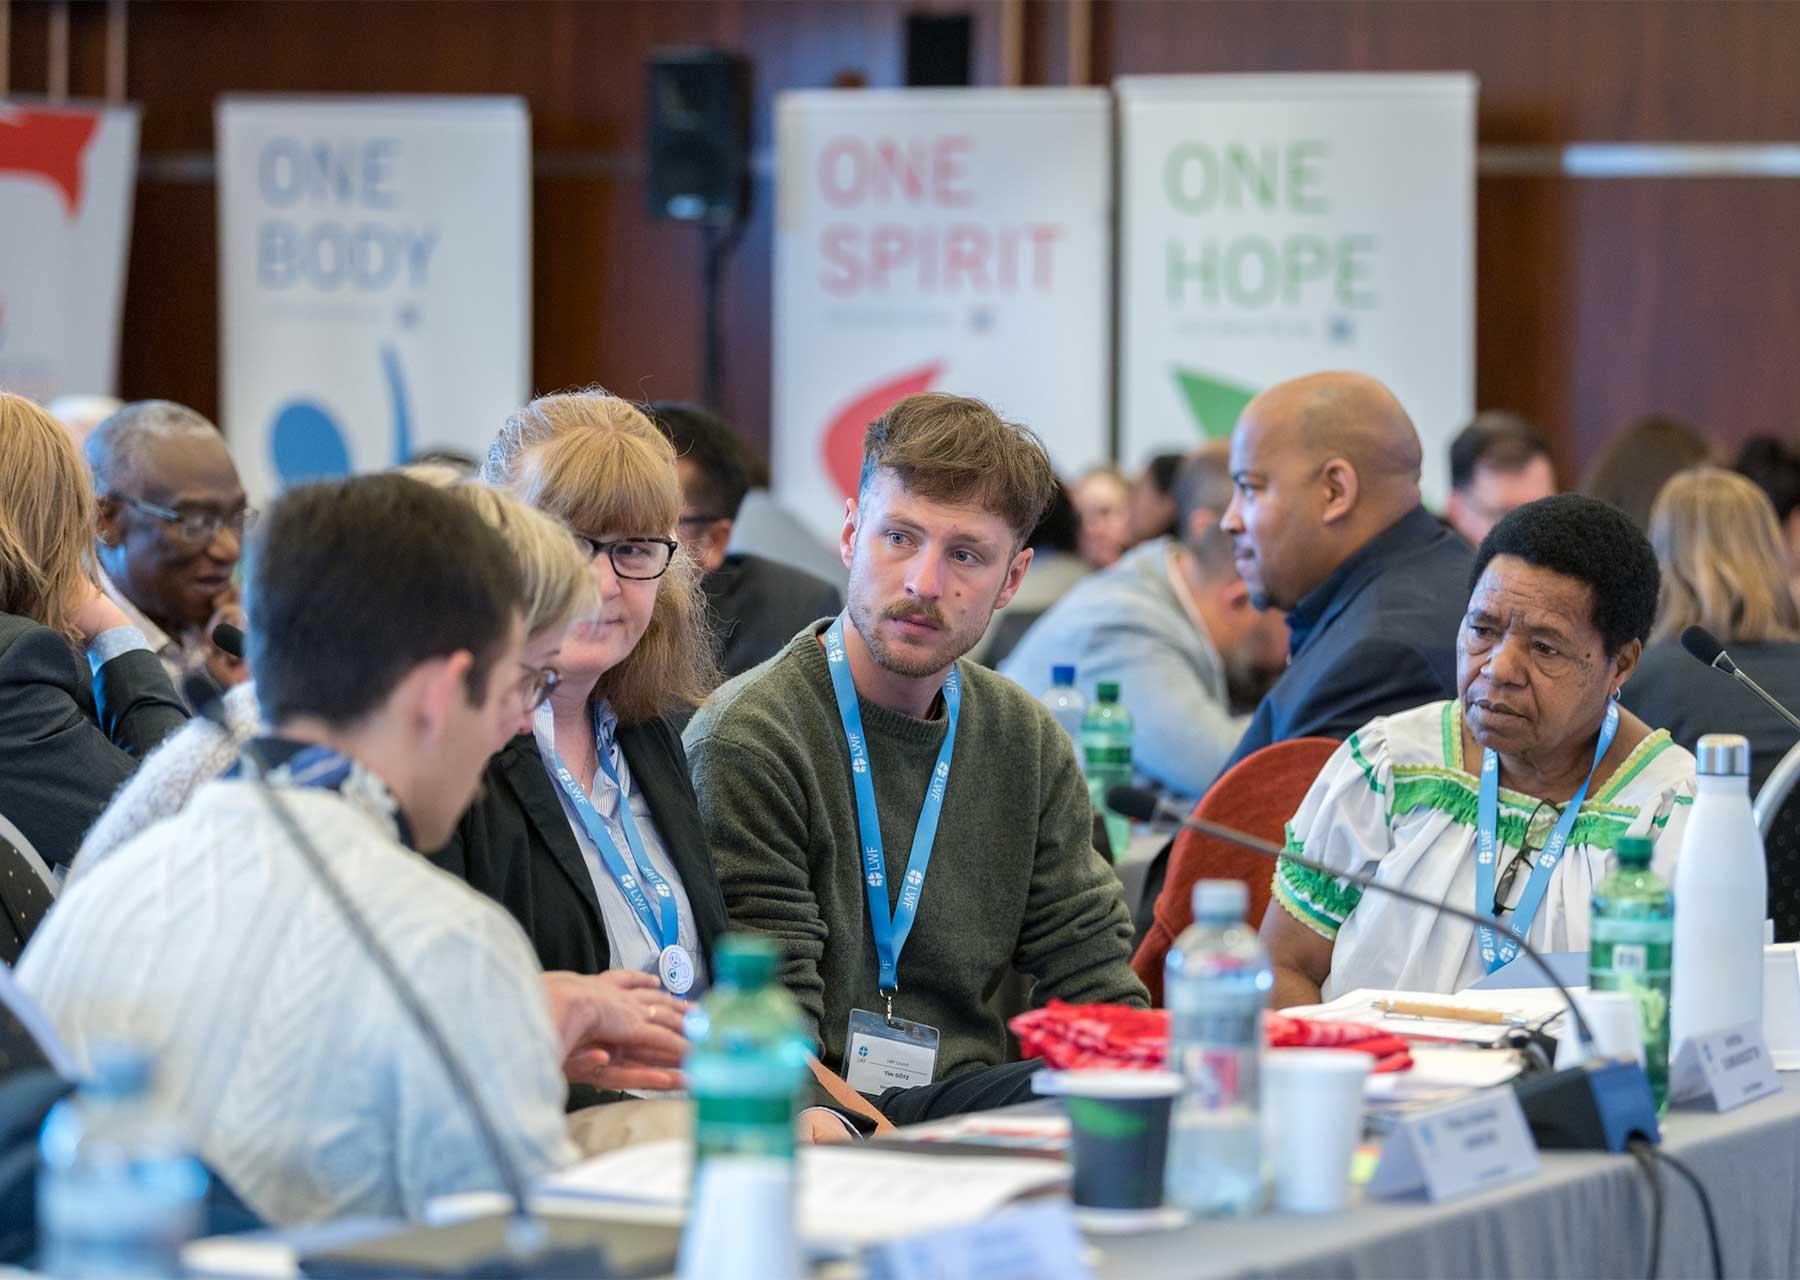 The report of the Finance Committee Chairperson underlined the “unwavering commitment and support” from LWF’s member churches, related organizations, ecumenical and institutional partners. Photo: LWF/Albin Hillert